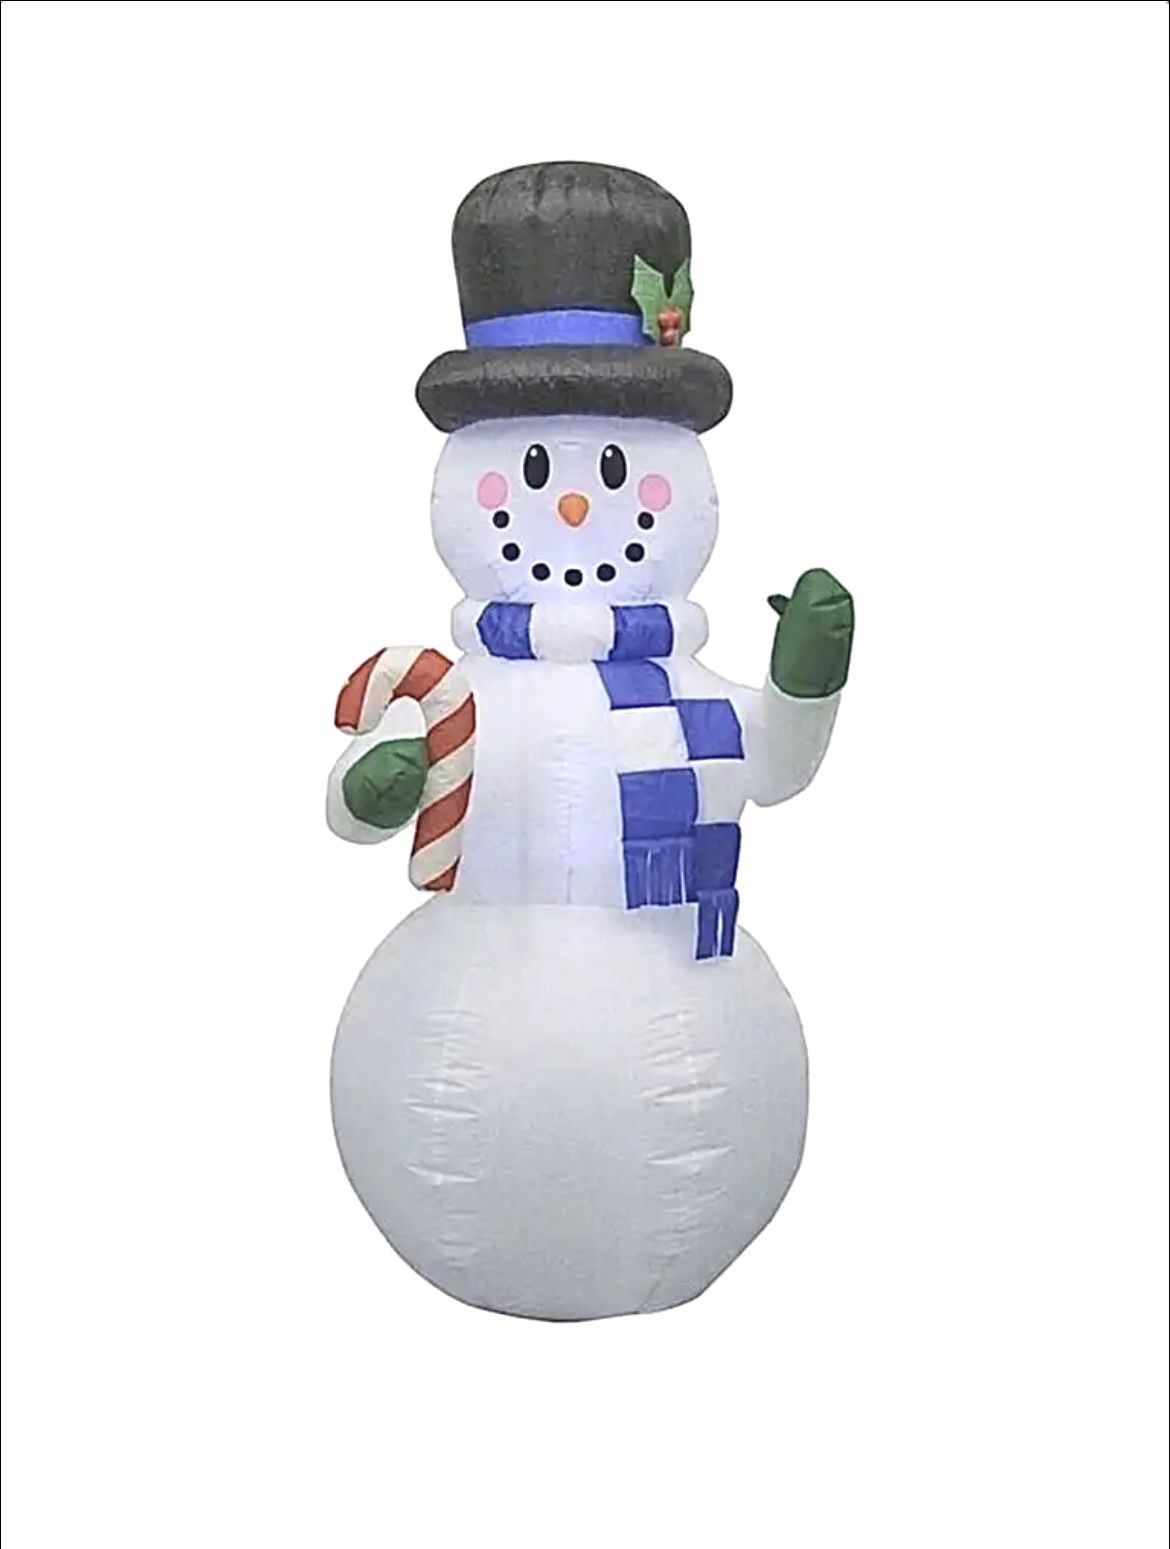 8 Ft Gemmy Airblown Inflatable LED Snowman Top Hat Candy Cane Christmas Holiday Outdoor Yard Decor